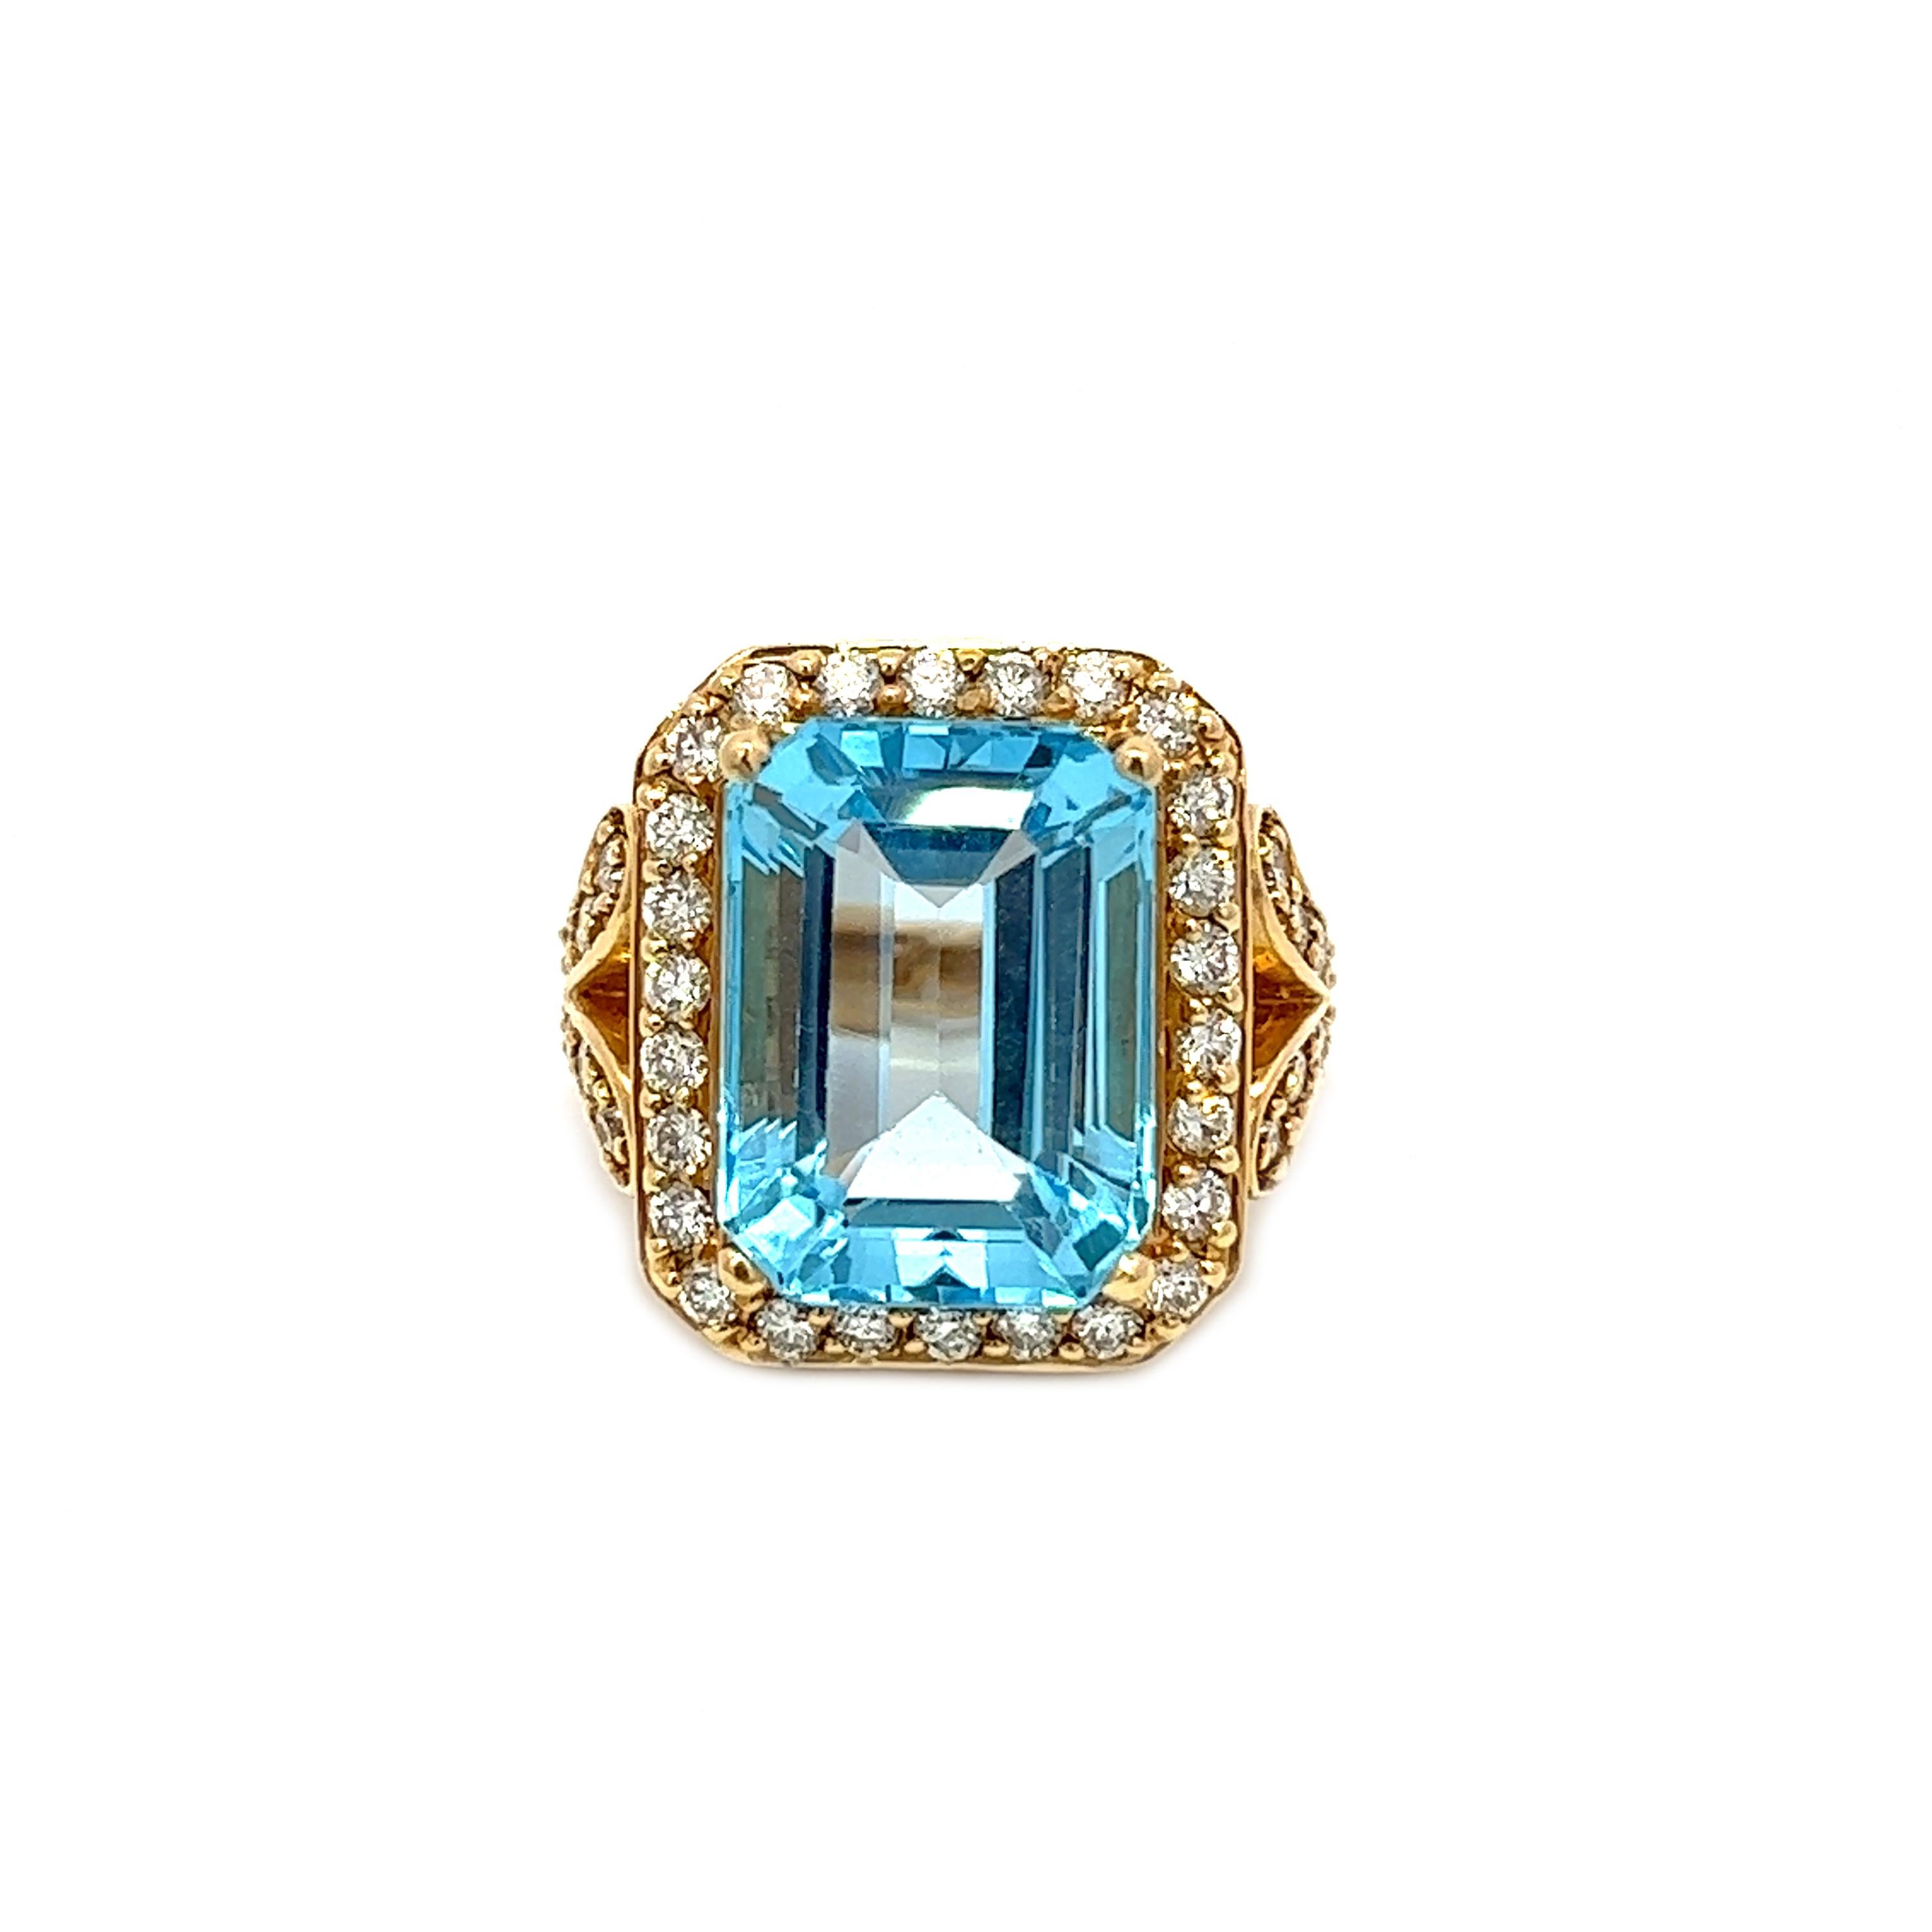 This magnificent 13.67ct cushion-cut blue topaz is elegantly encircled by a collection of round brilliant diamonds boasting H color and VS clarity, weighing a combined total of 1.40ct. The entirety of these resplendent stones are meticulously